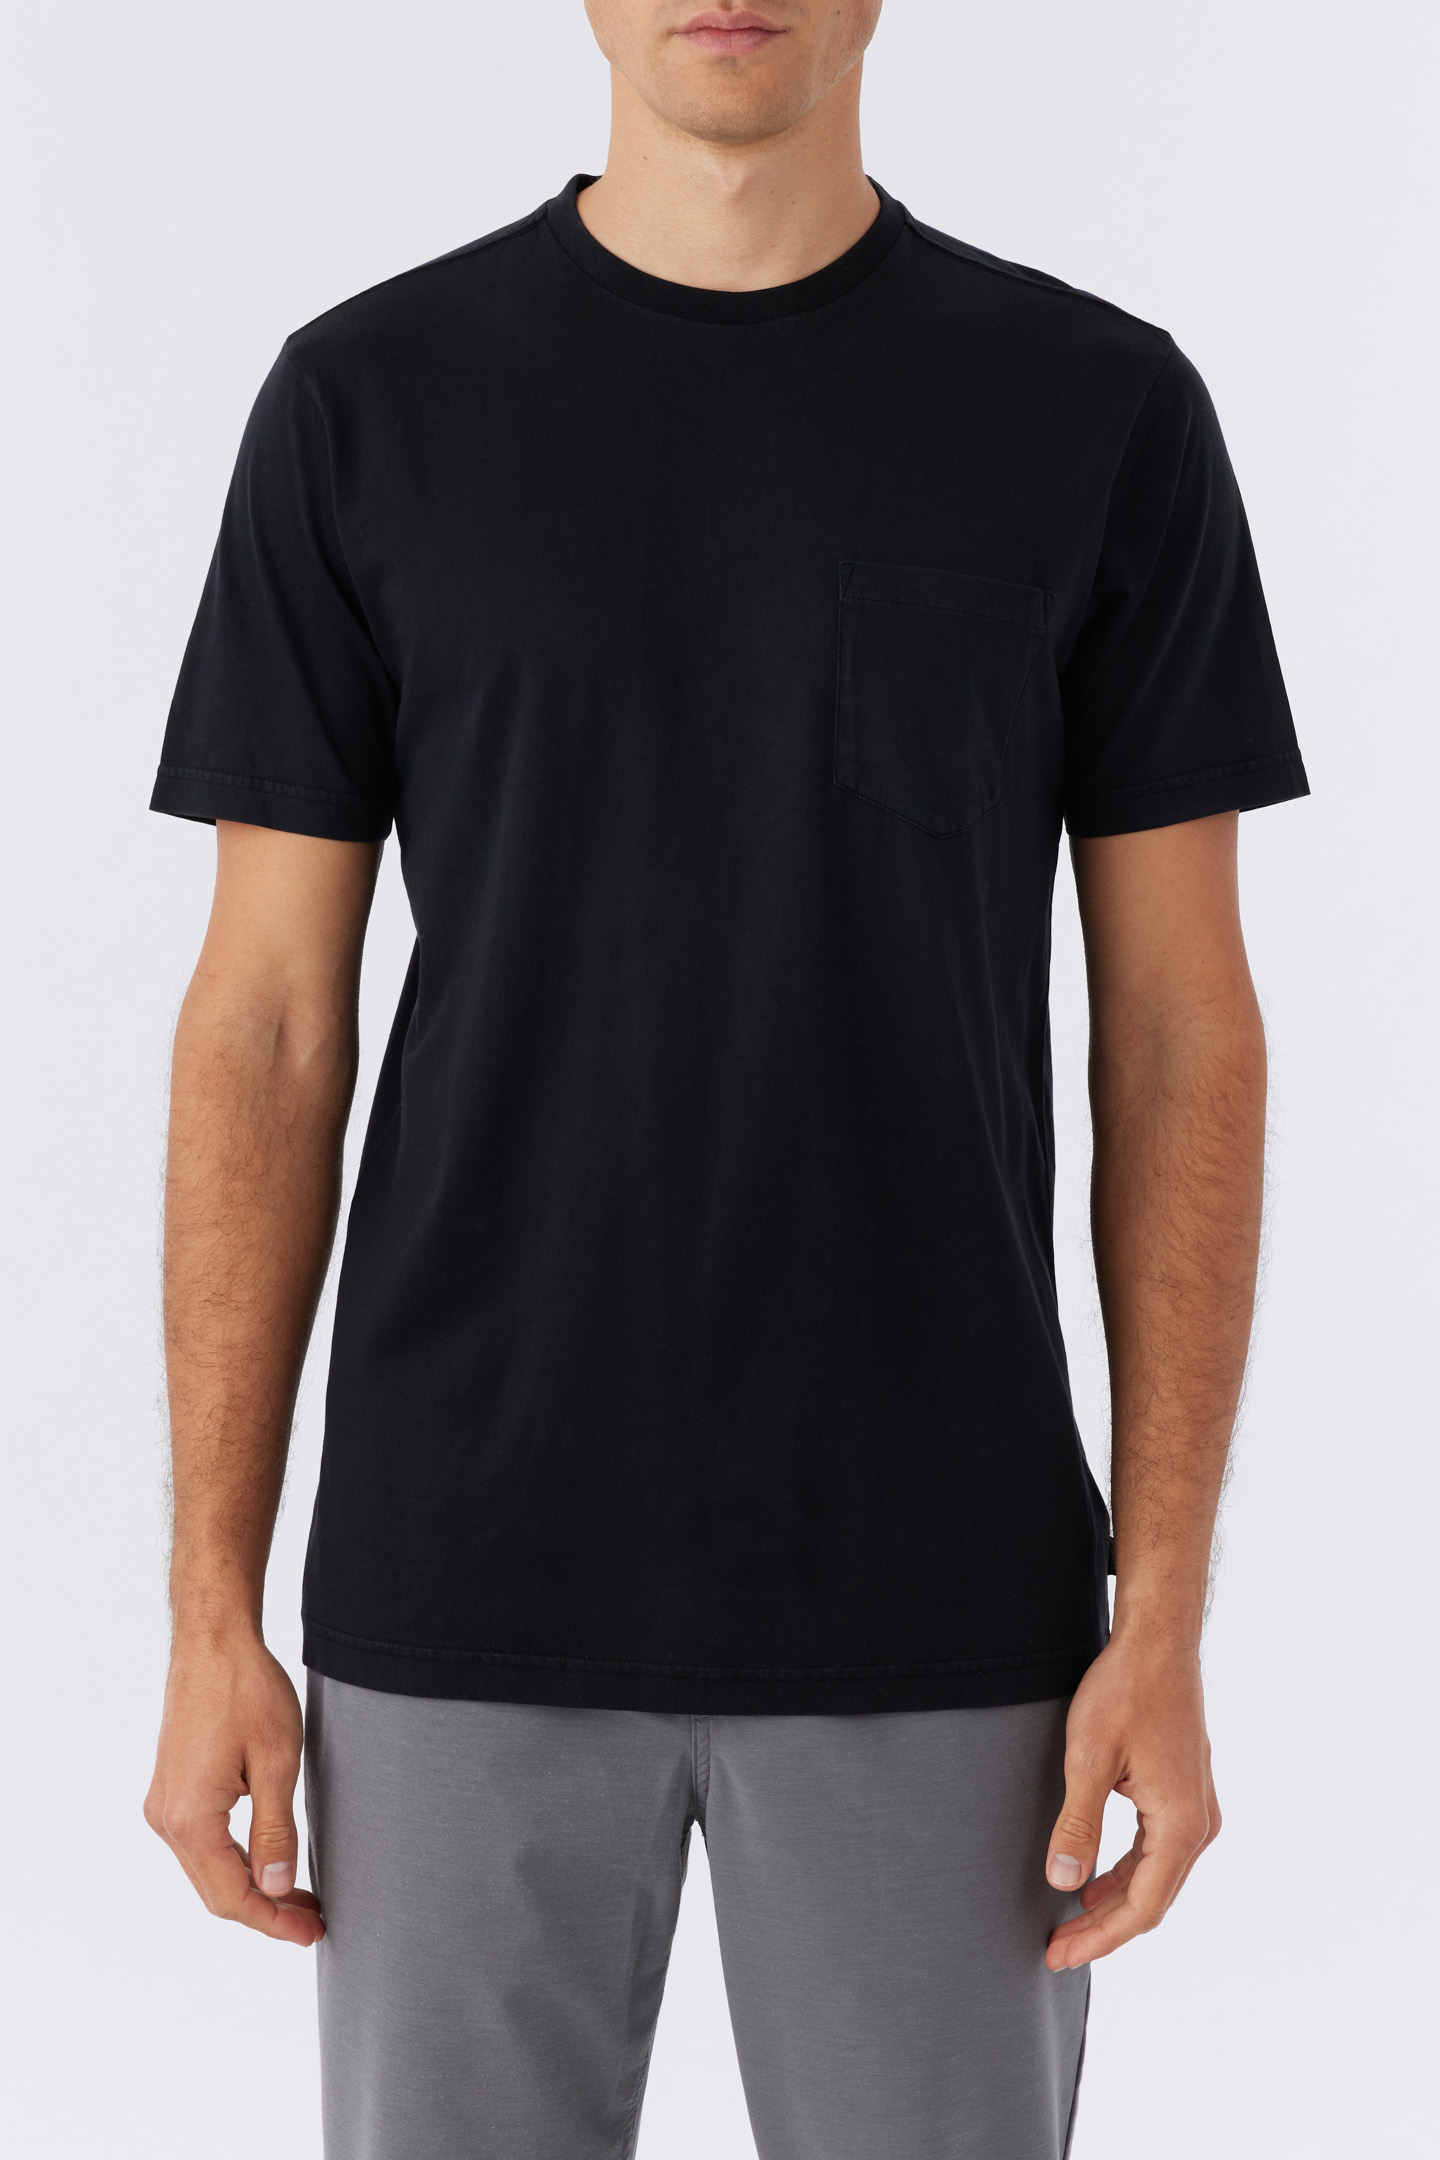 East Cliff Hang Out Tee - Black | O'Neill